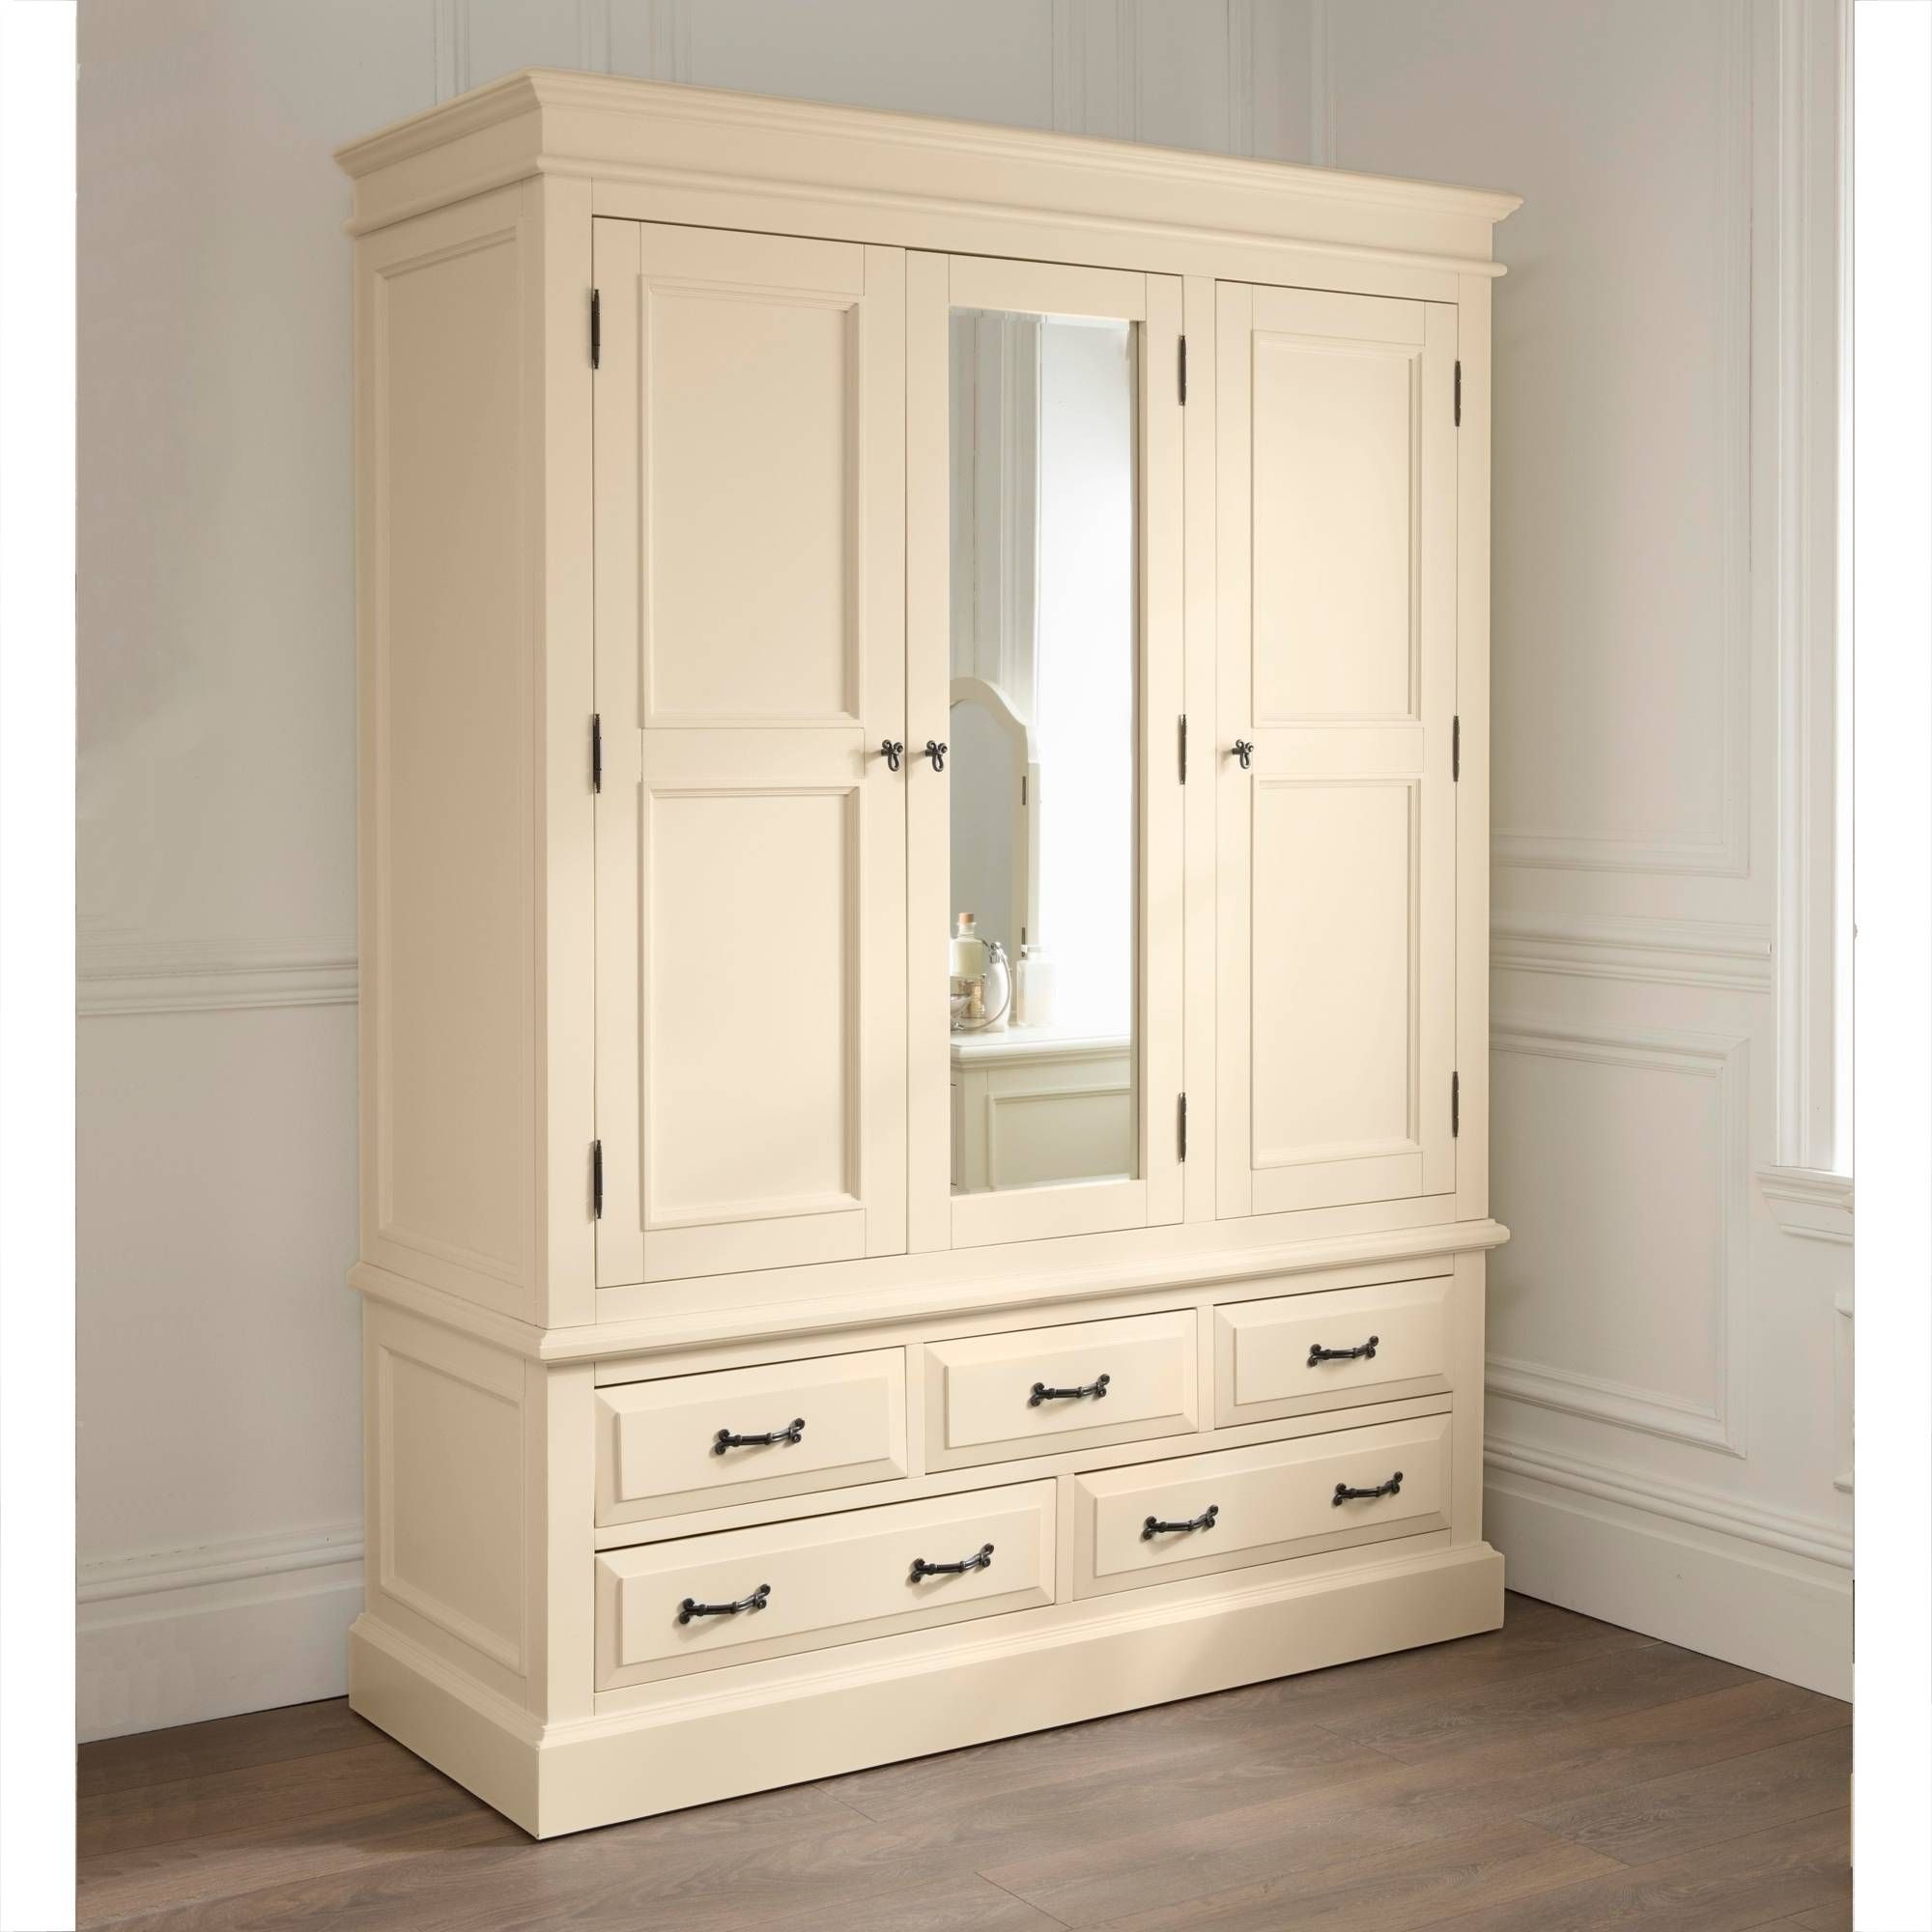 Shabby Chic Wardrobe For Your New Modern Lifestyle – Bangaki Intended For Shabby Chic Pine Wardrobes (View 7 of 15)